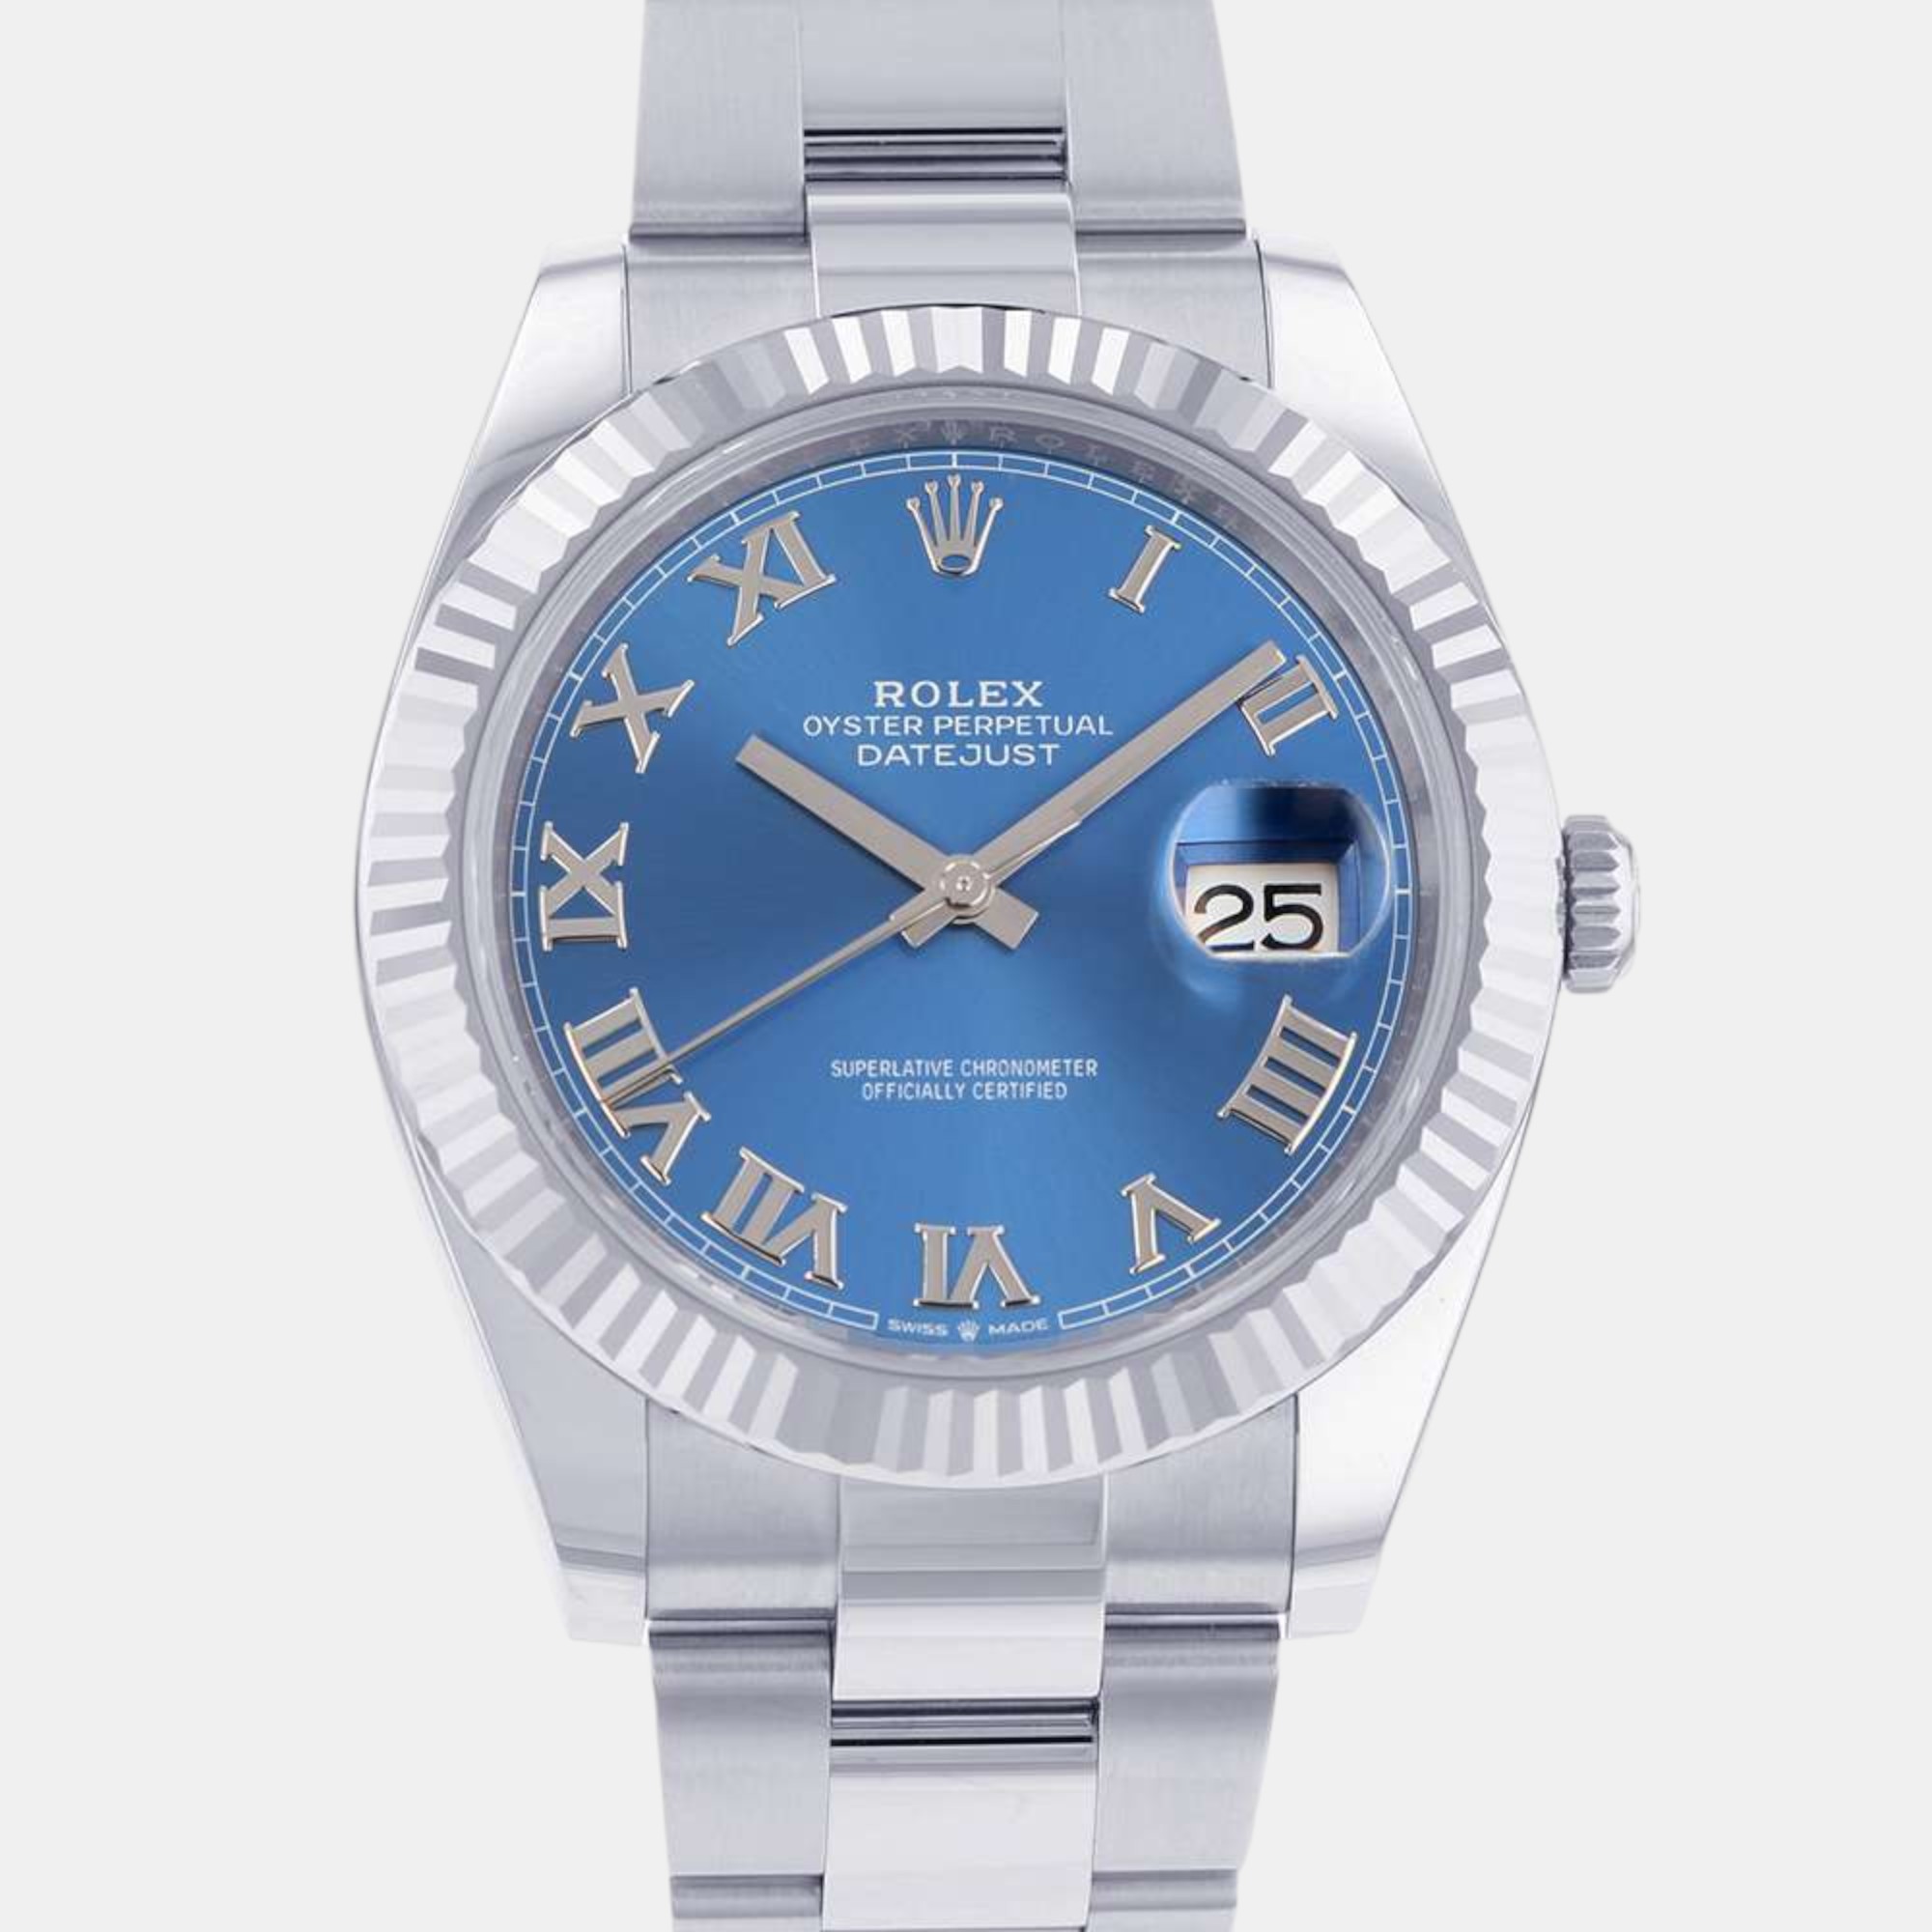 Rolex blue 18k white gold stainless steel datejust automatic men's wristwatch 41 mm